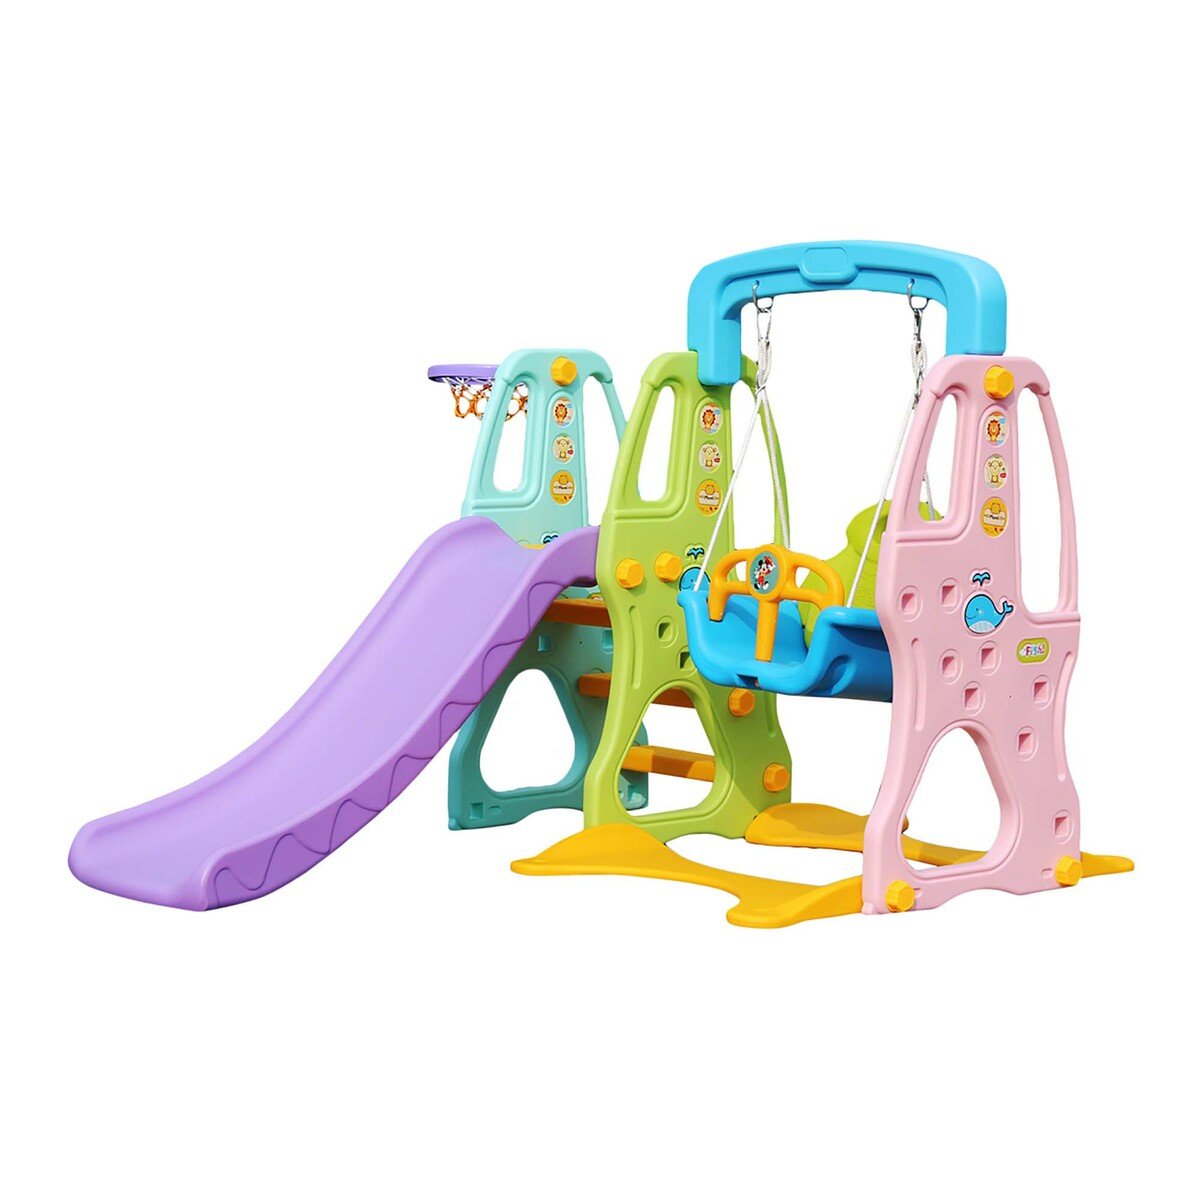 Little Angel Kids Toys Slide and Swing L-DC03-COLORFUL